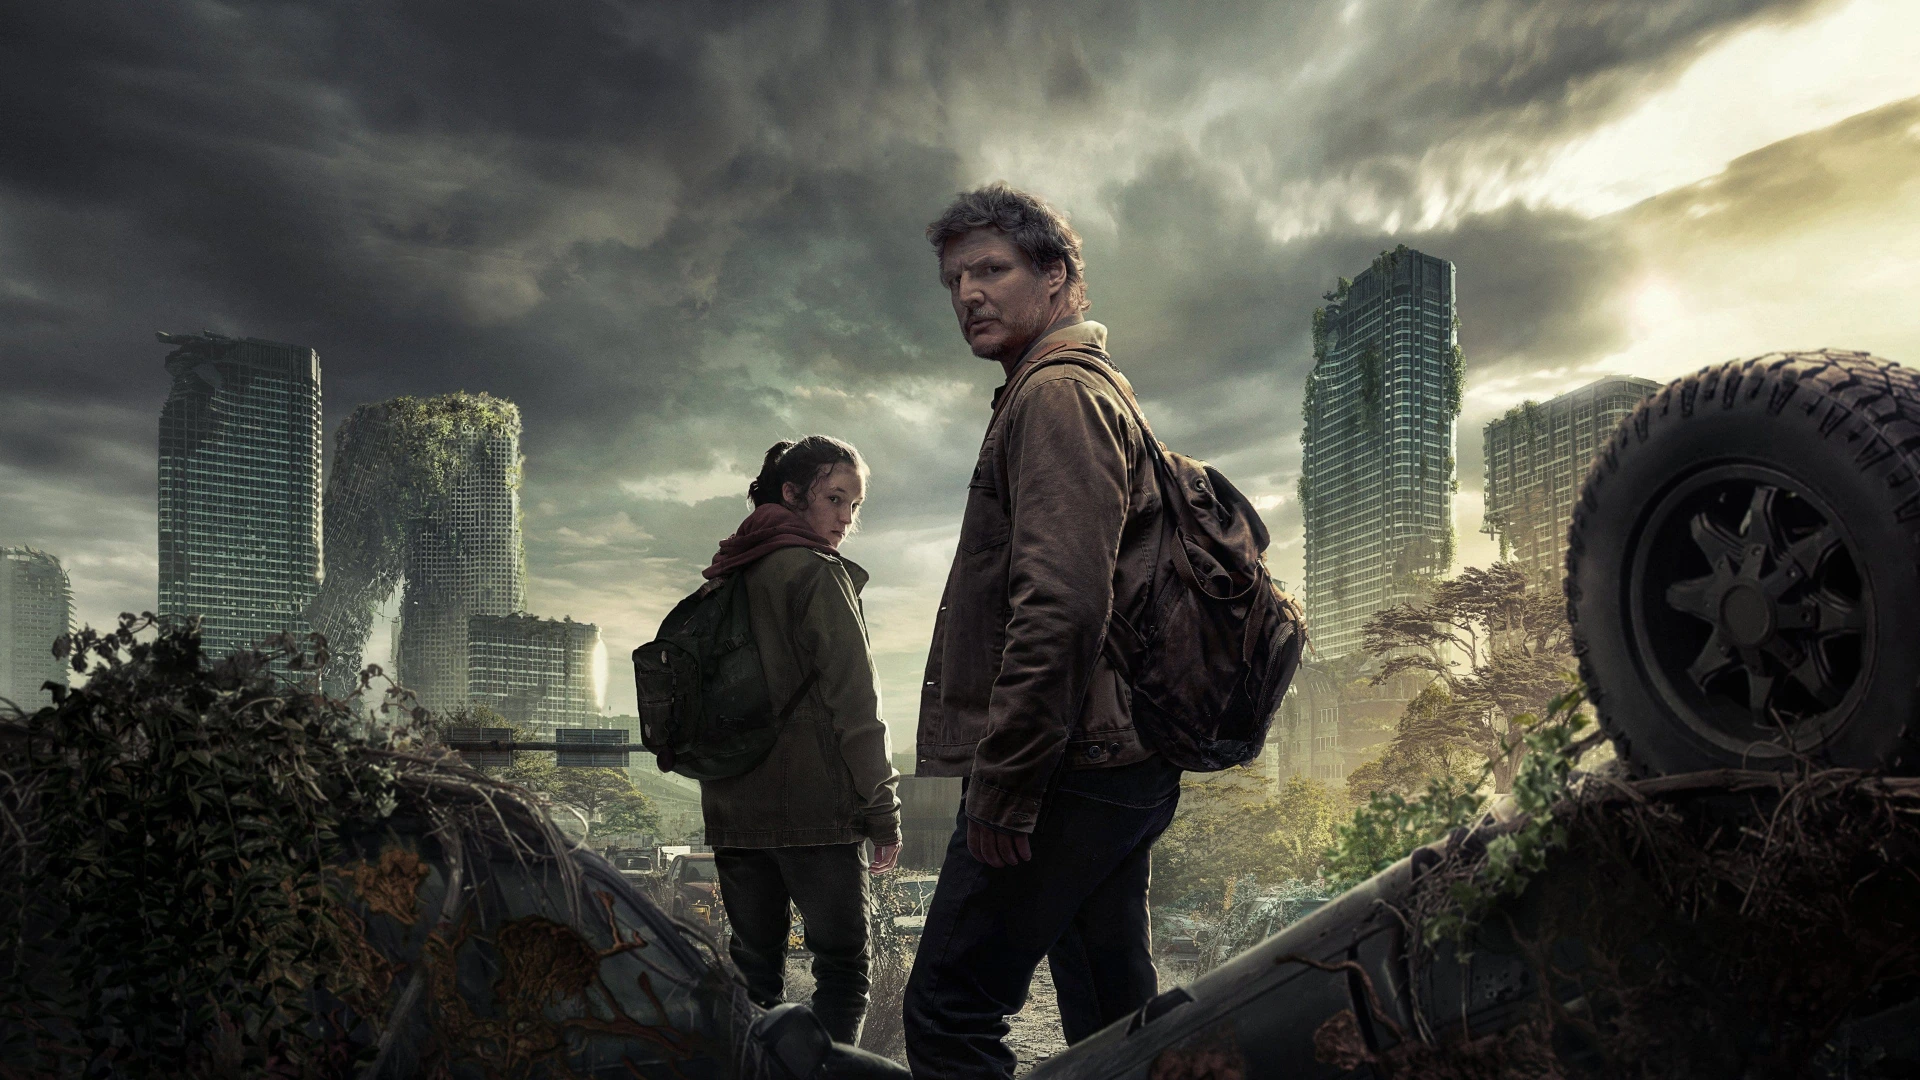 Imdb The Last Of Us The first episode of The Last of Us on HBO is rated 9.5 on IMDb |  gagadget.com